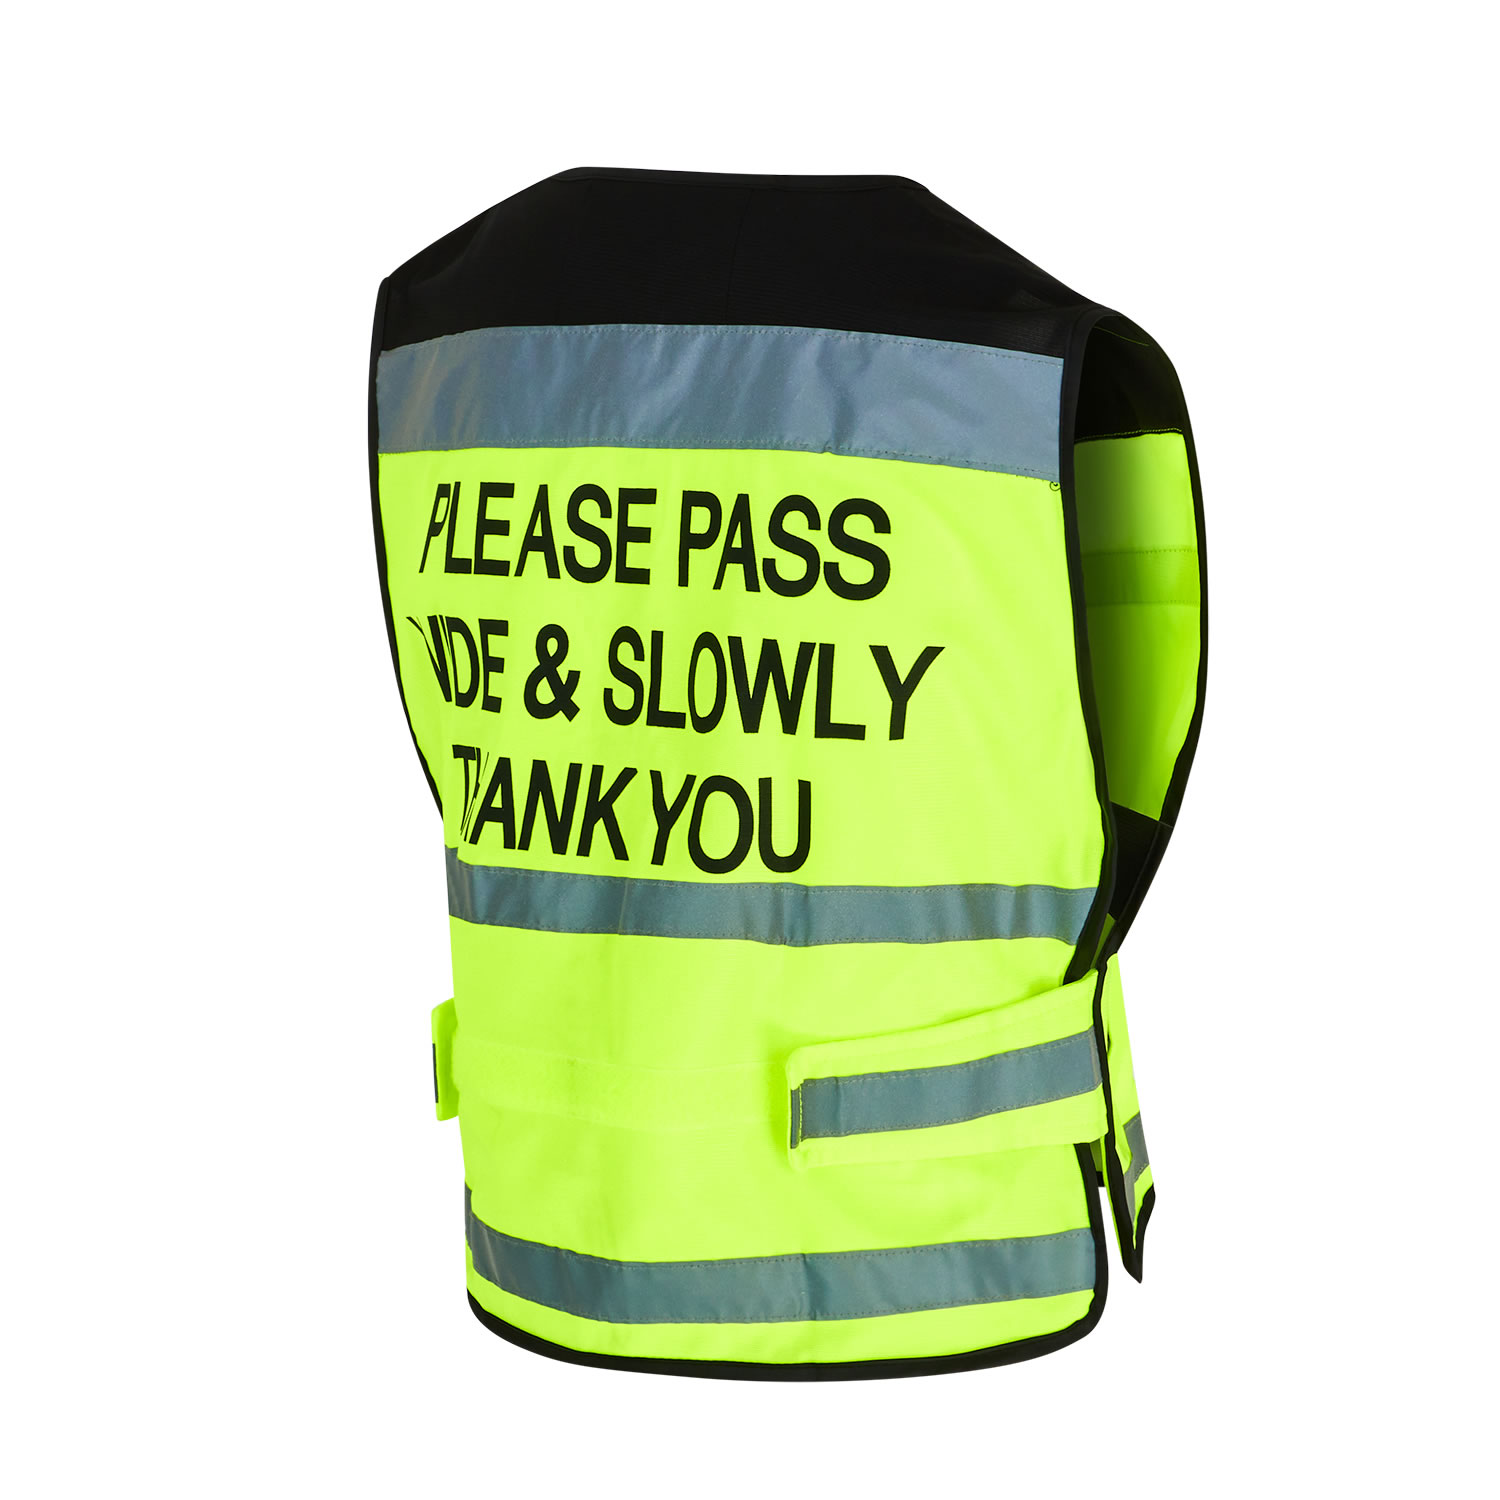 EQUISAFETY AIR WAISTCOAT PLEASE PASS WIDE & SLOWLY YELLOW